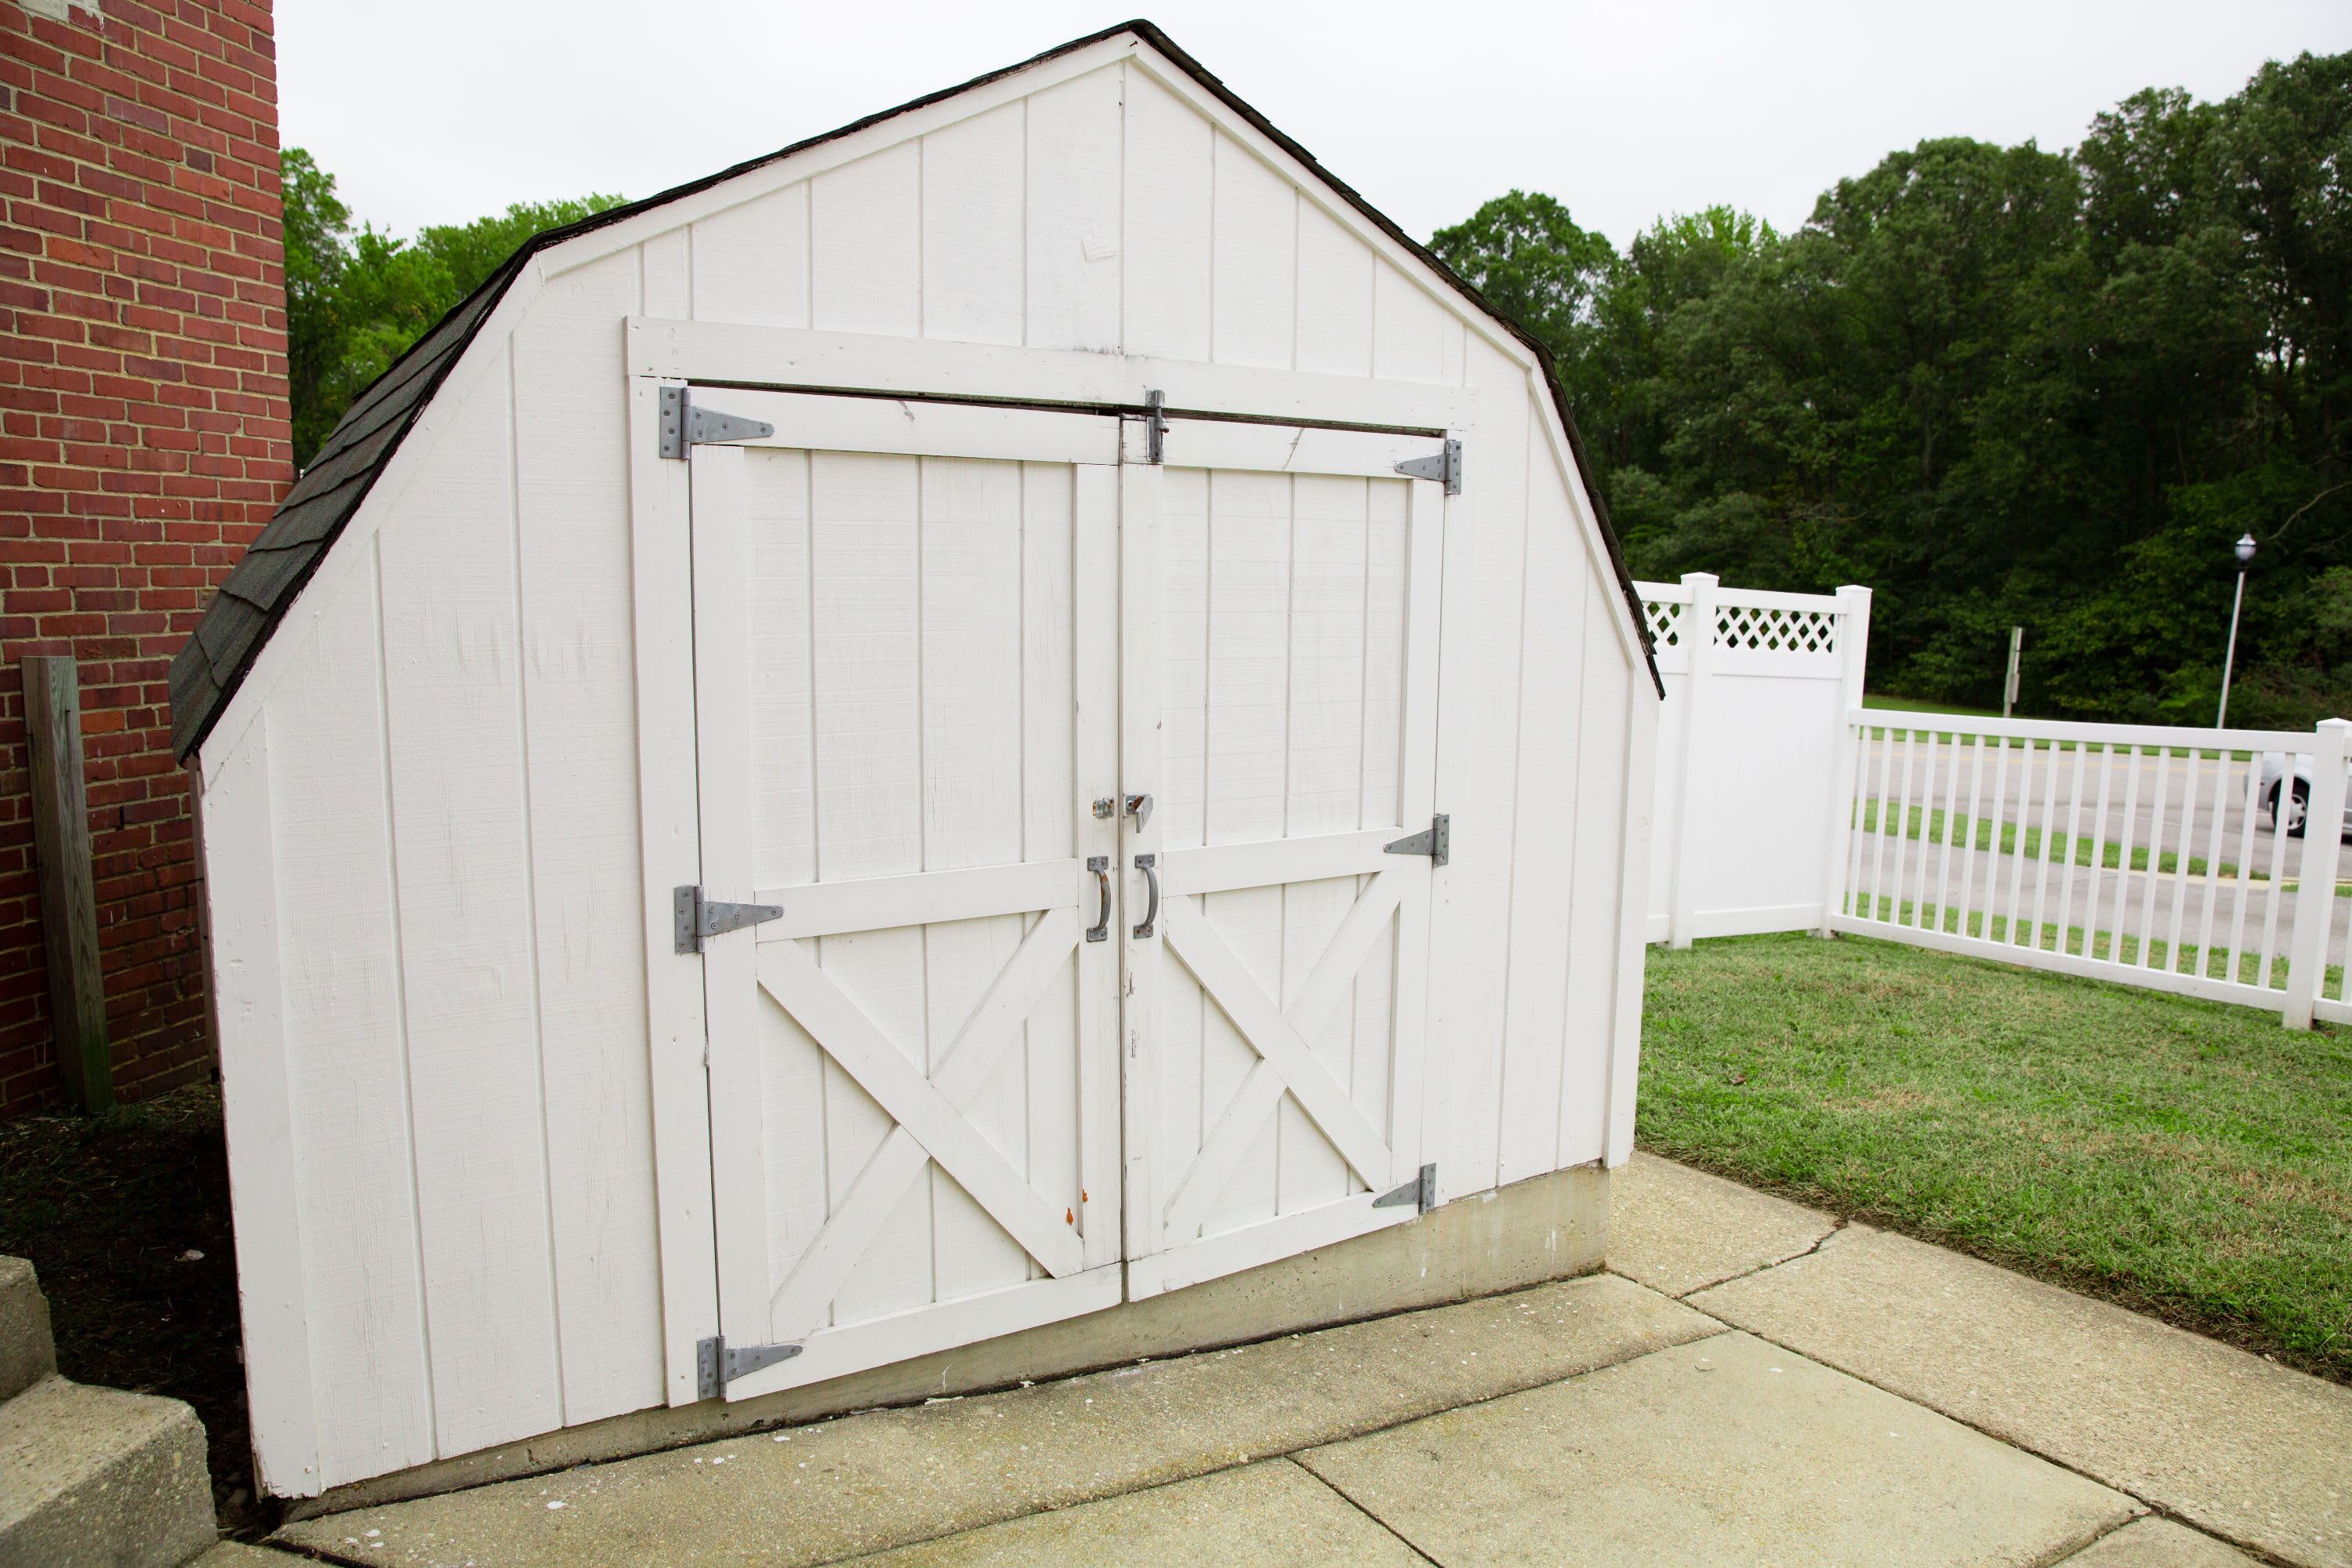 A storage shed in the backyard of a home at Carpenter Park in Patuxent River, Maryland